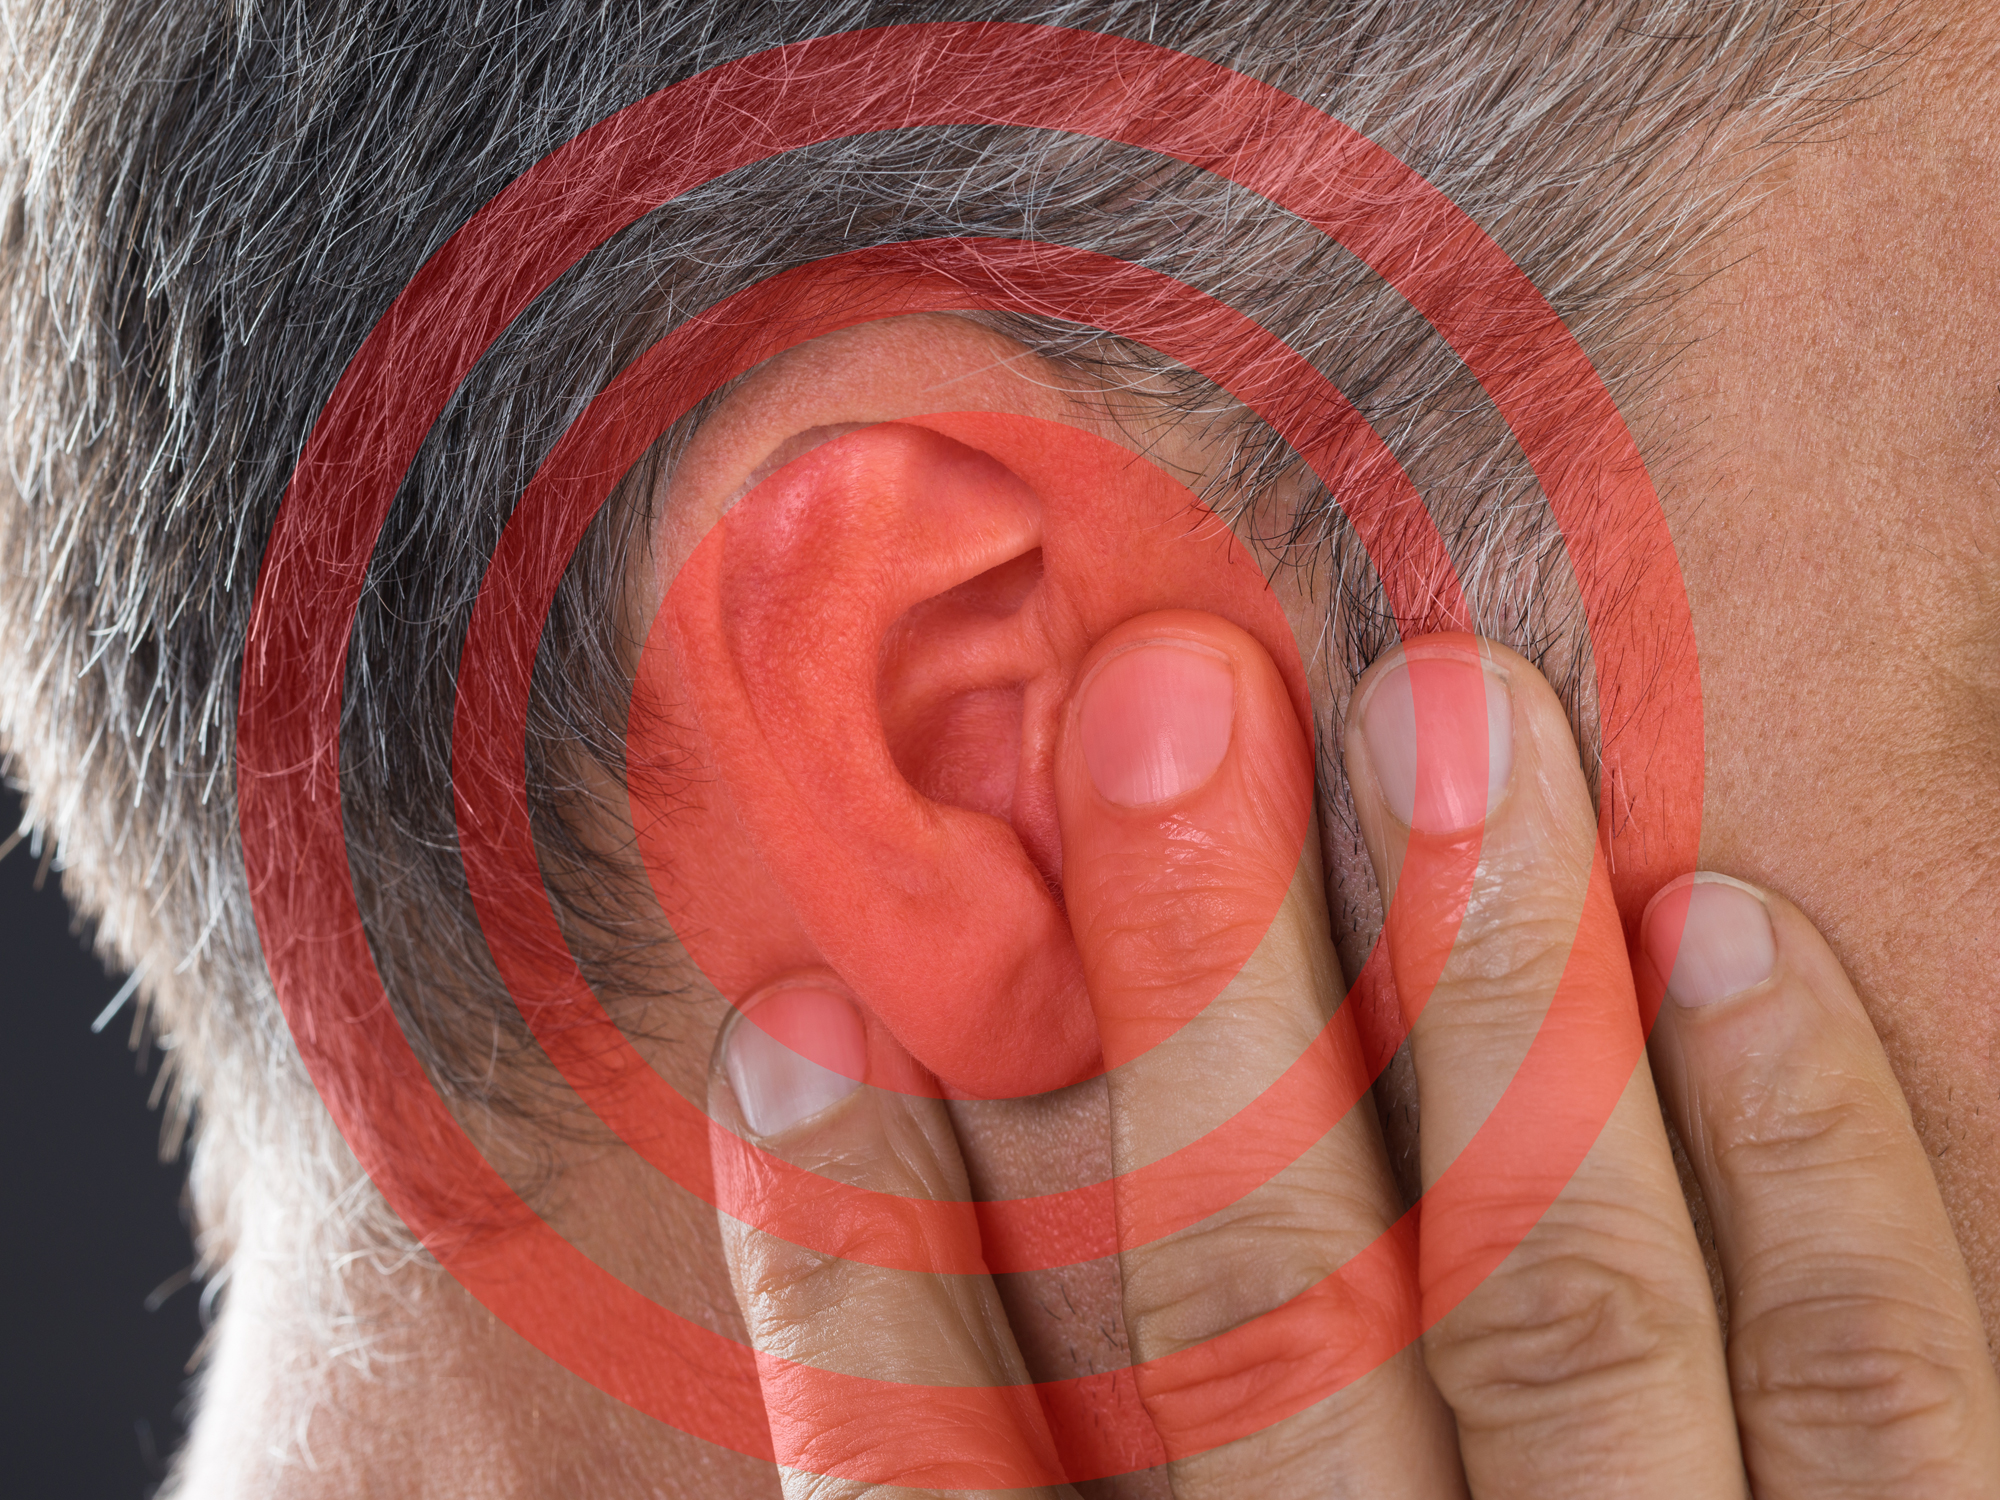 4 supplements to prevent hearing loss